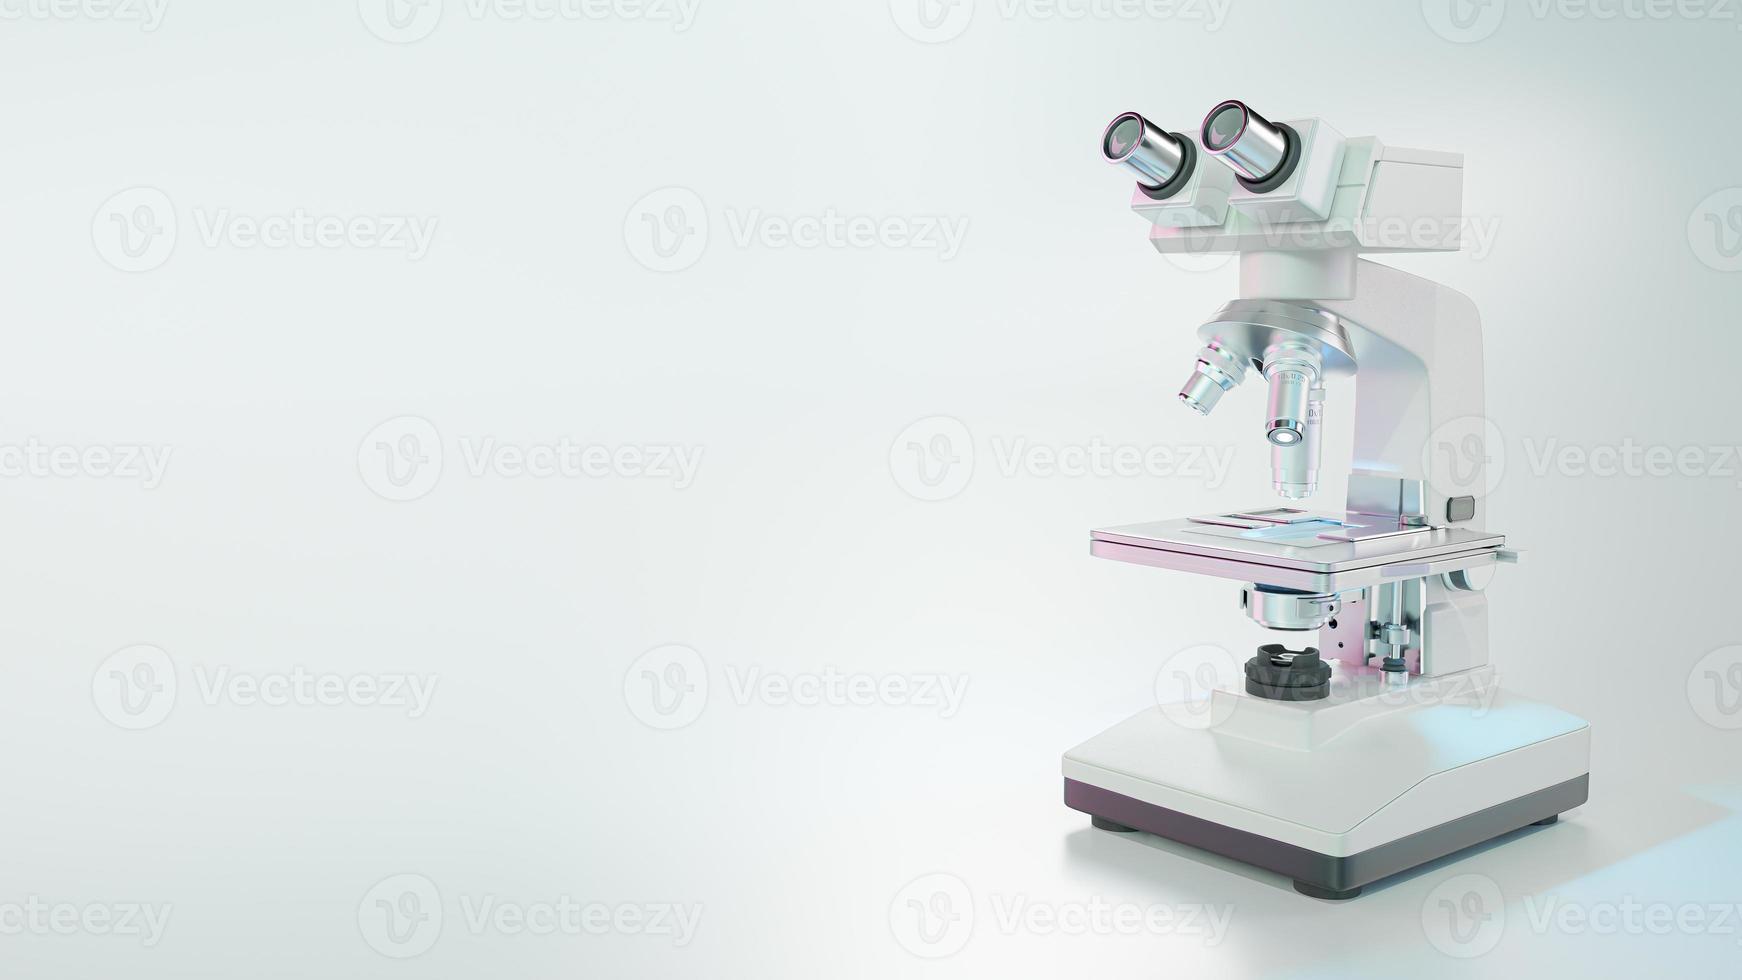 Microscope chemistry. pharmaceutical instrument. microbiology magnifying tool and symbol of chemical science exploration. photo